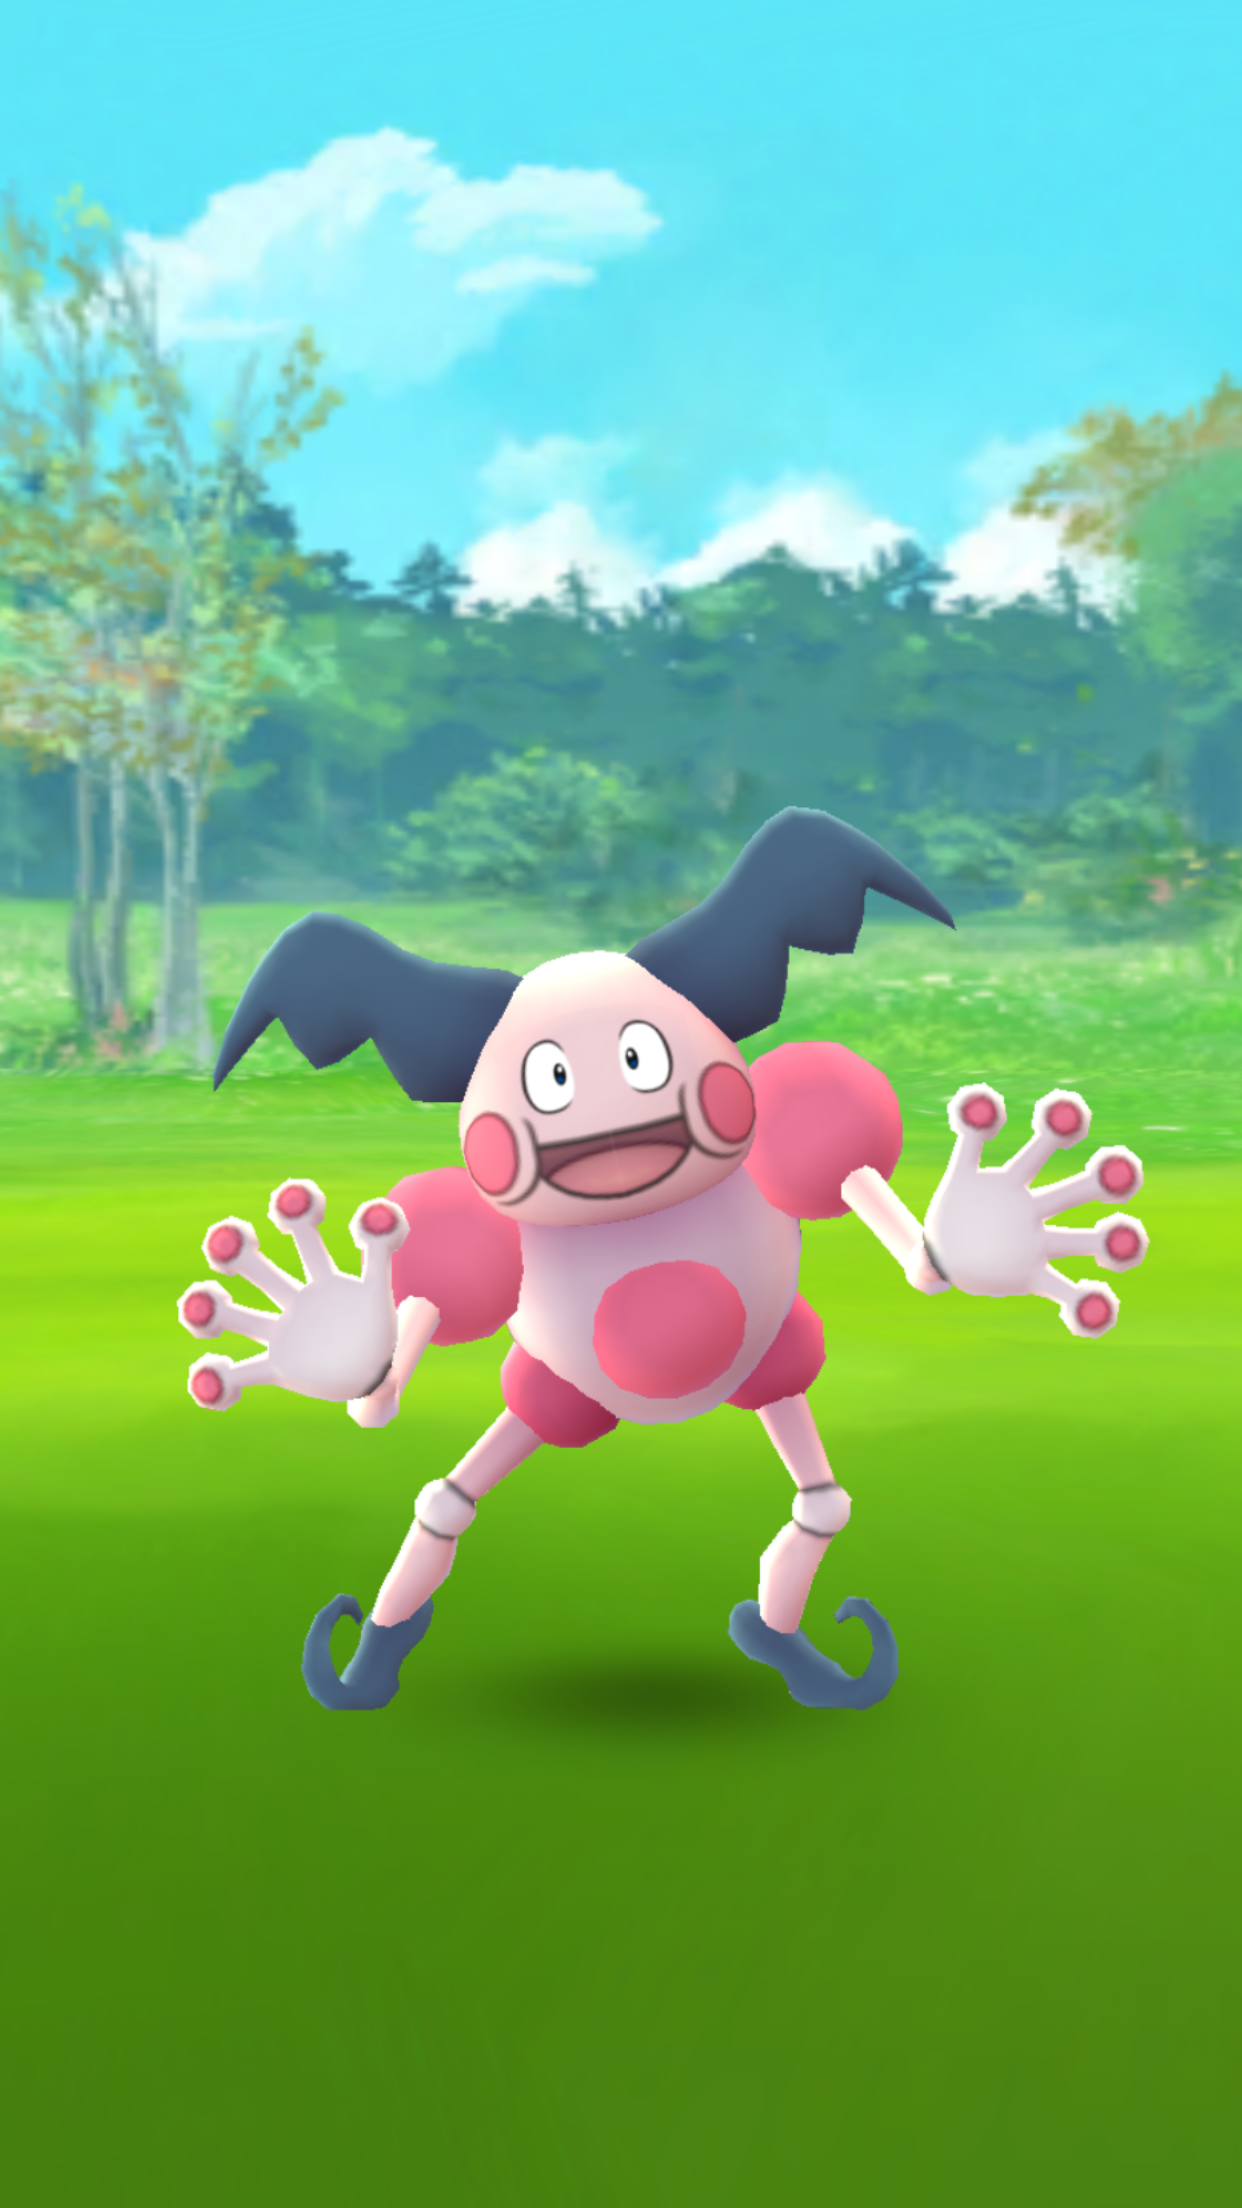 A wild Mr. Mime appeared!